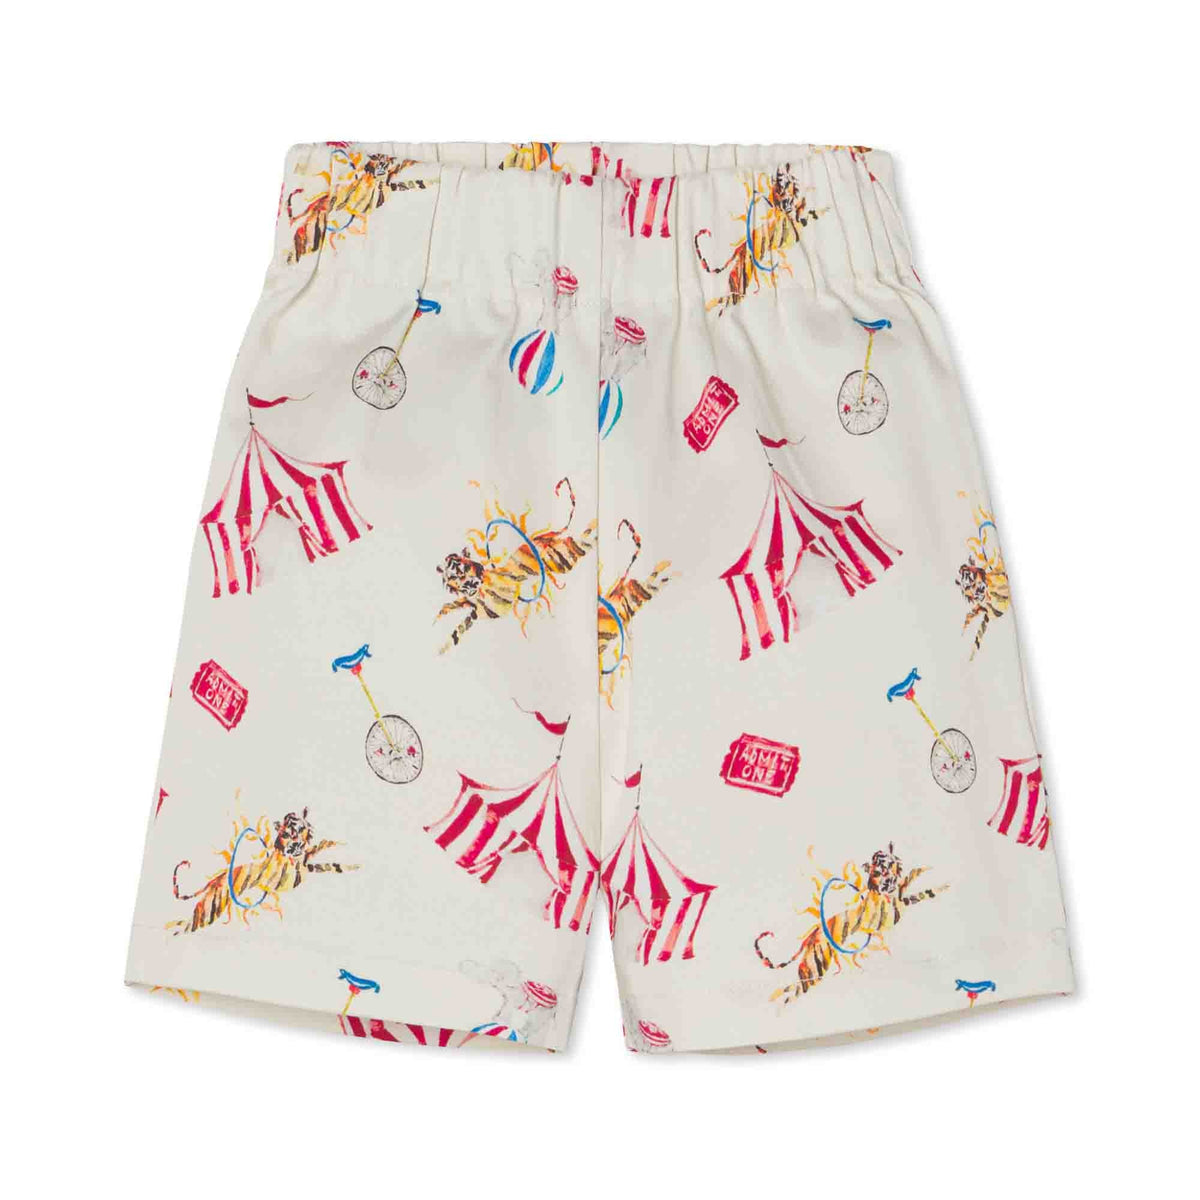 Classic and Preppy Dylan Shorts, Circus Print - FINAL SALE-Bottoms-Circus Print-9-12M-CPC - Classic Prep Childrenswear